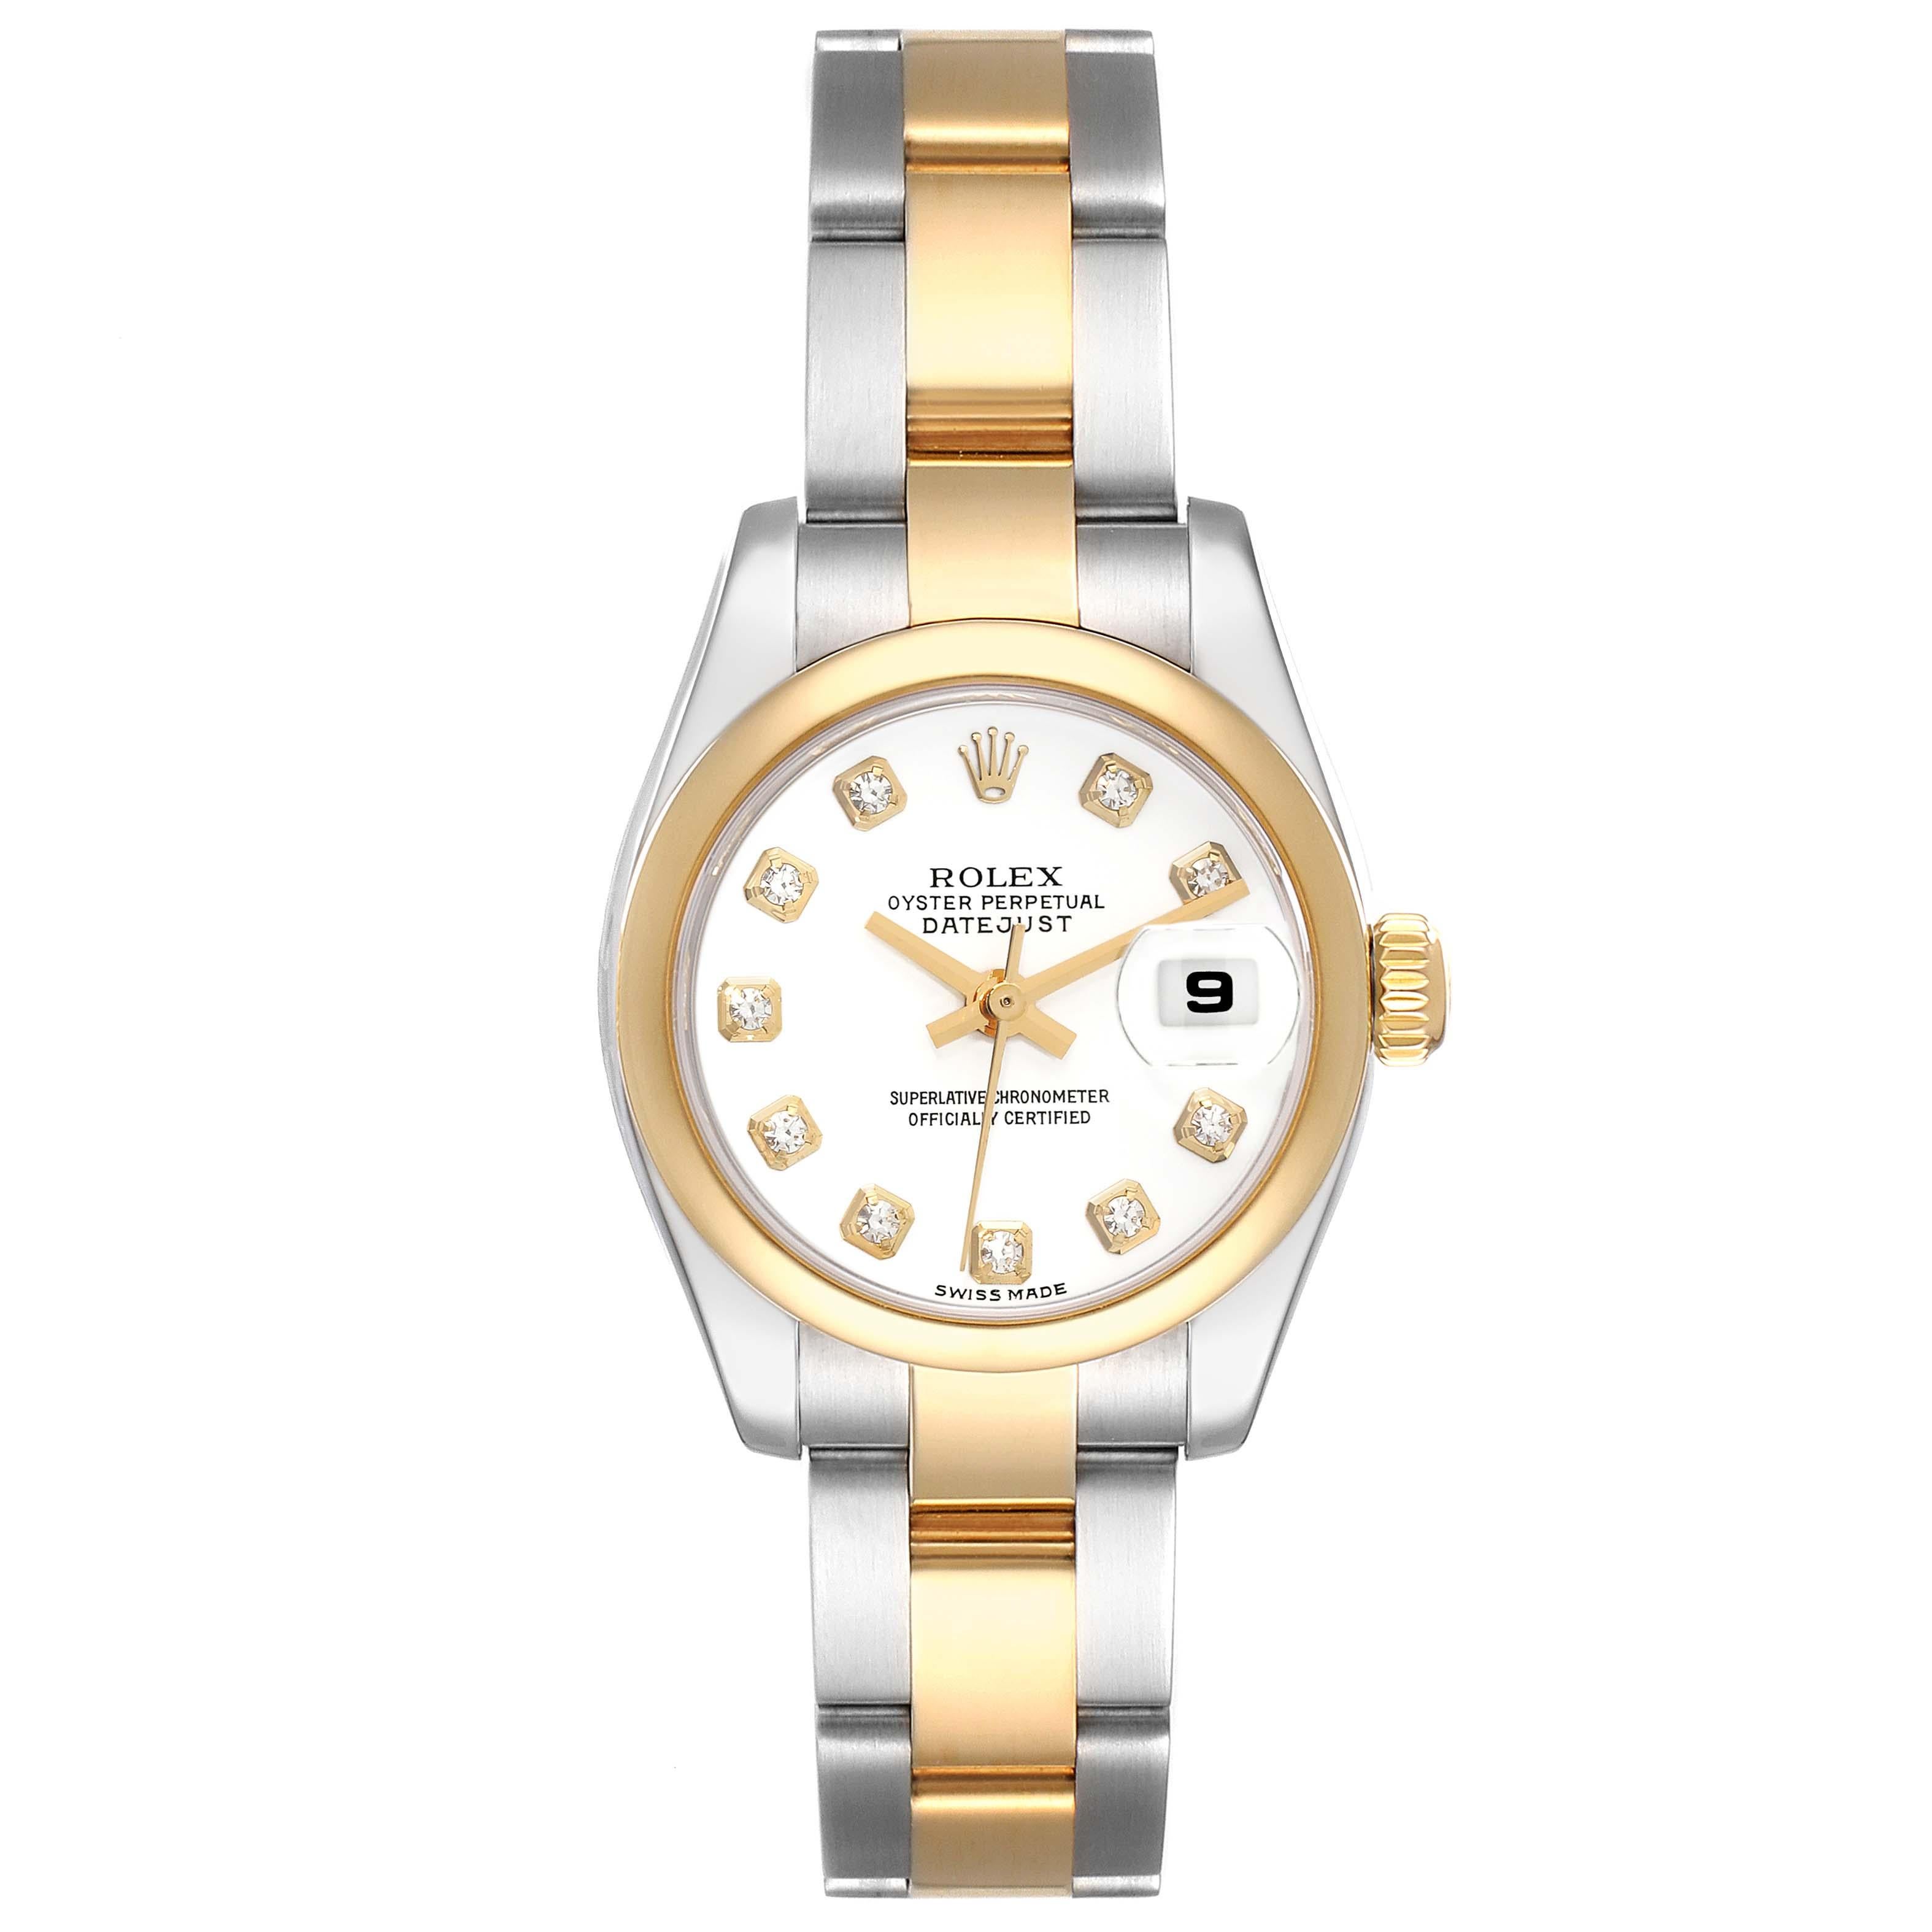 Rolex Datejust White Diamond Dial Steel Yellow Gold Ladies Watch 179163. Officially certified chronometer automatic self-winding movement. Stainless steel oyster case 26 mm in diameter. Rolex logo on an 18K yellow gold crown. 18k yellow gold smooth